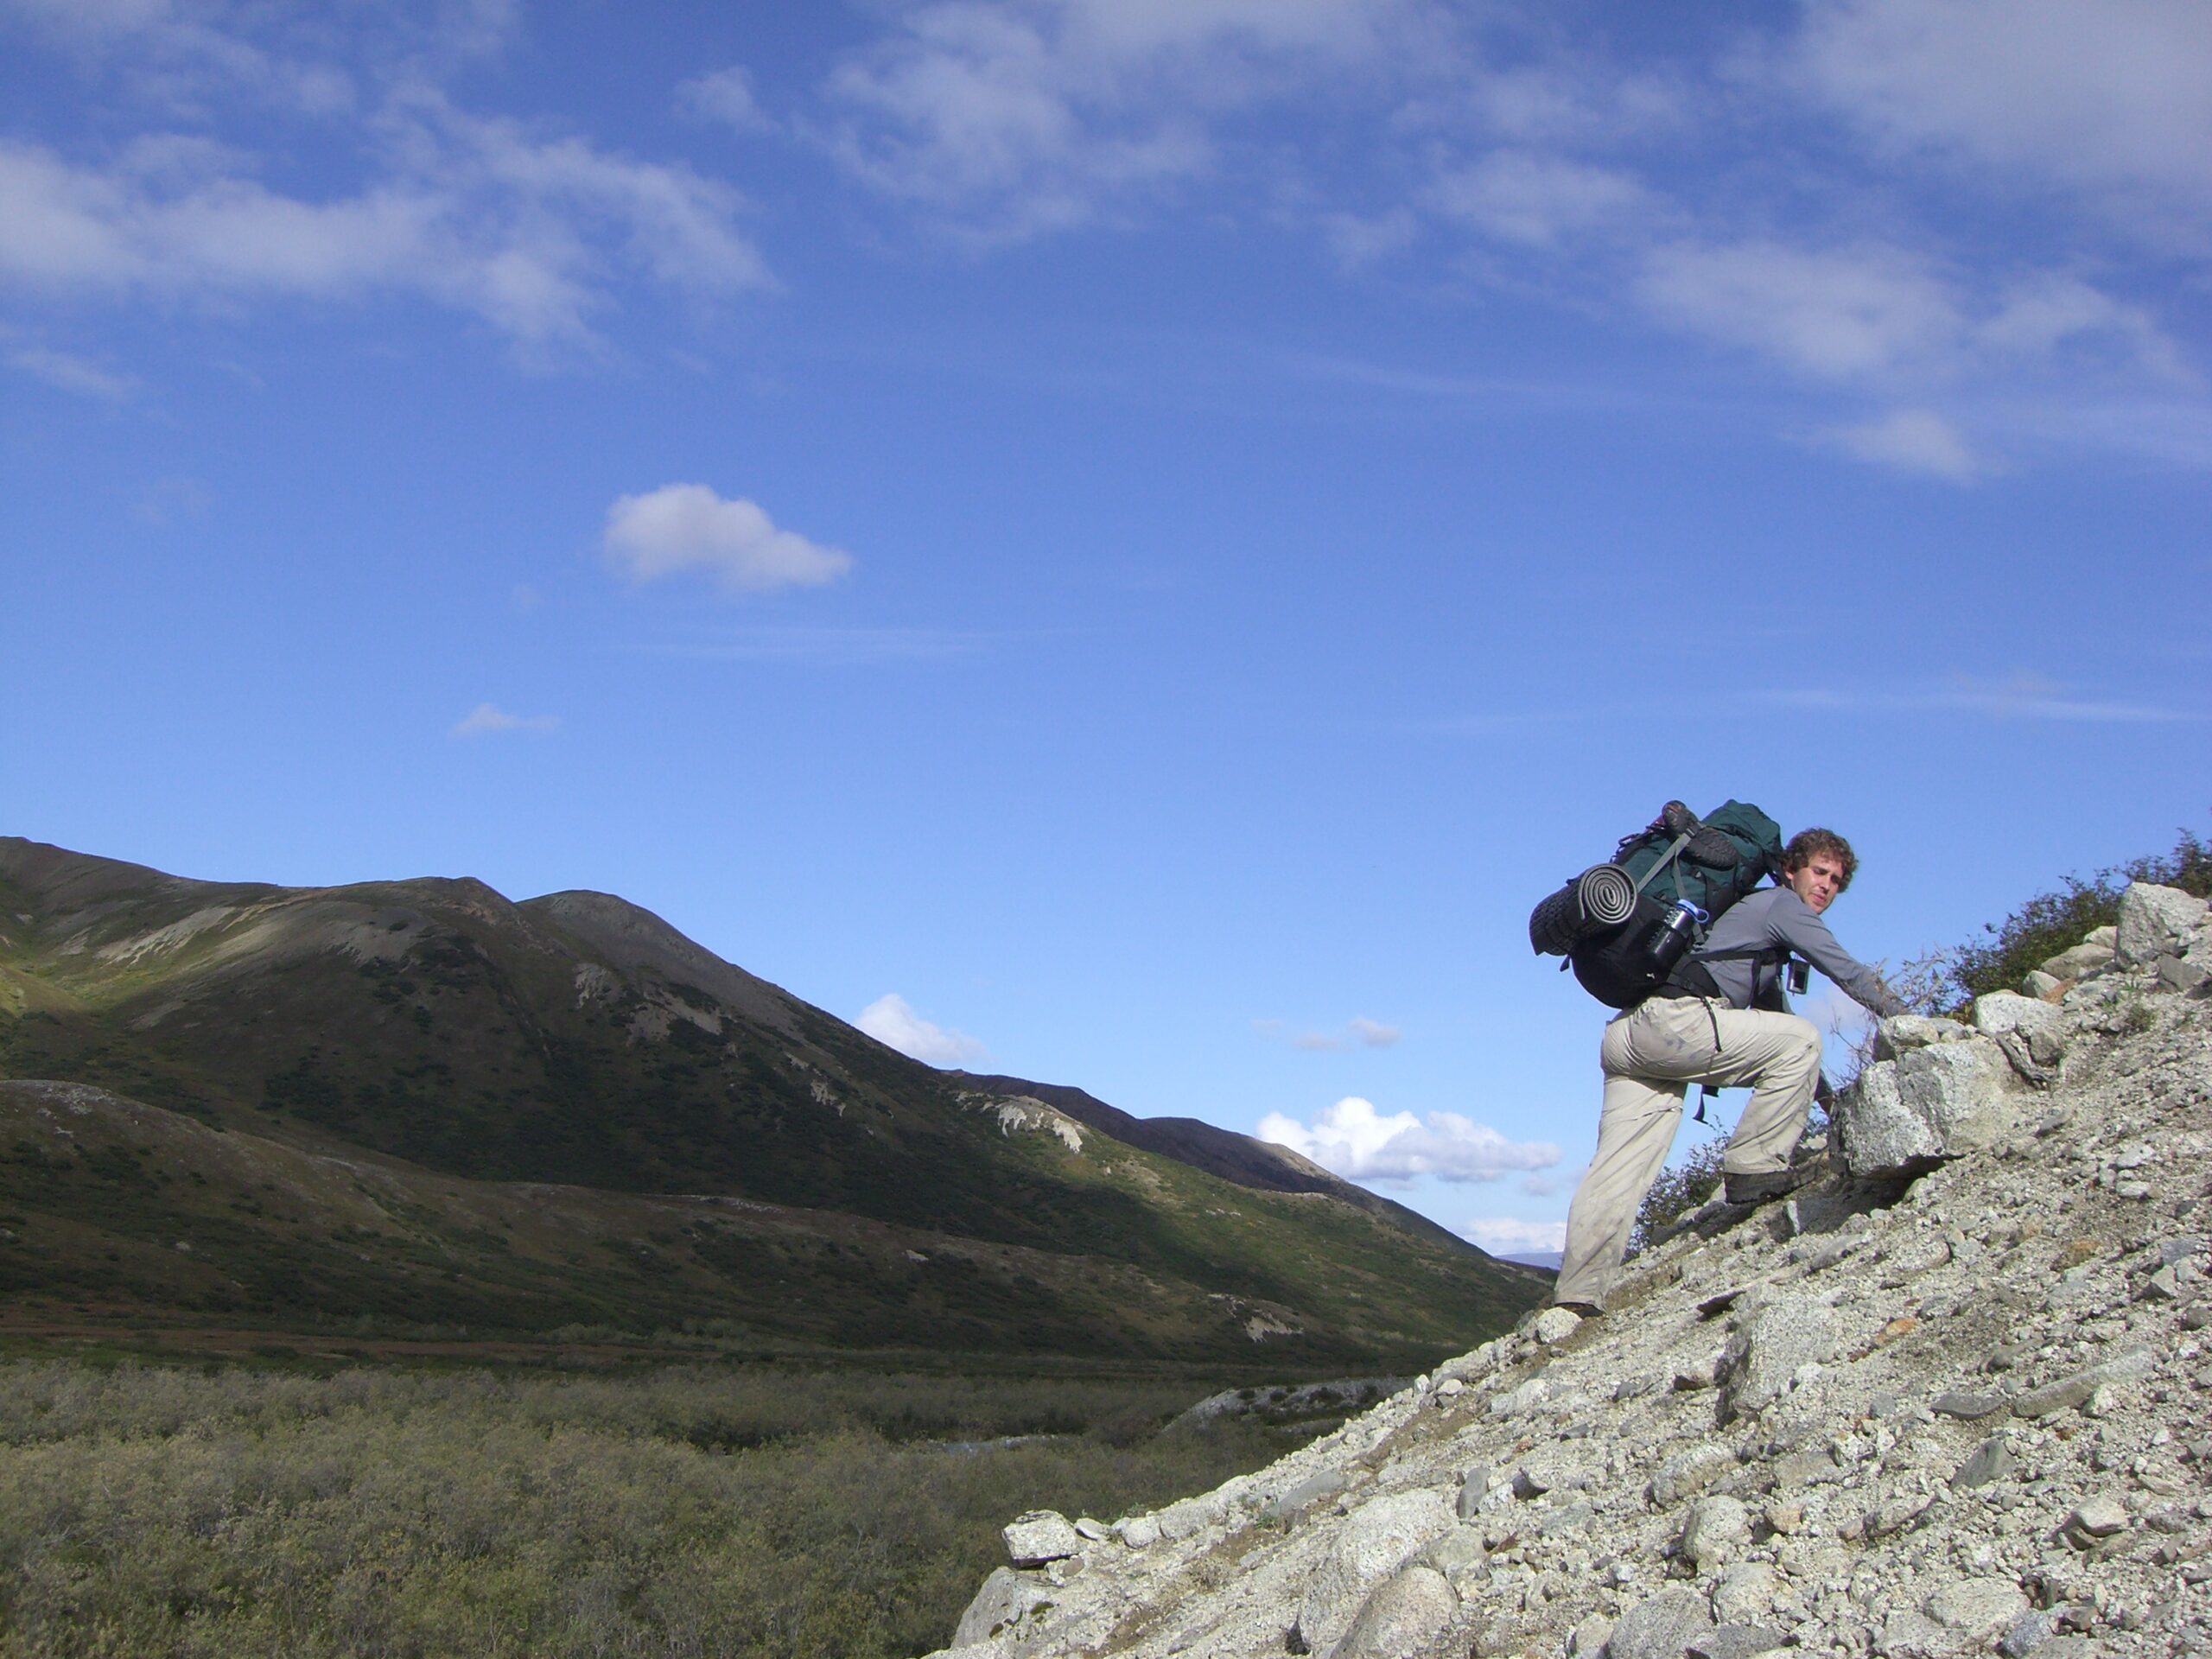 Brian tries to get to higher ground in Denali National Park.